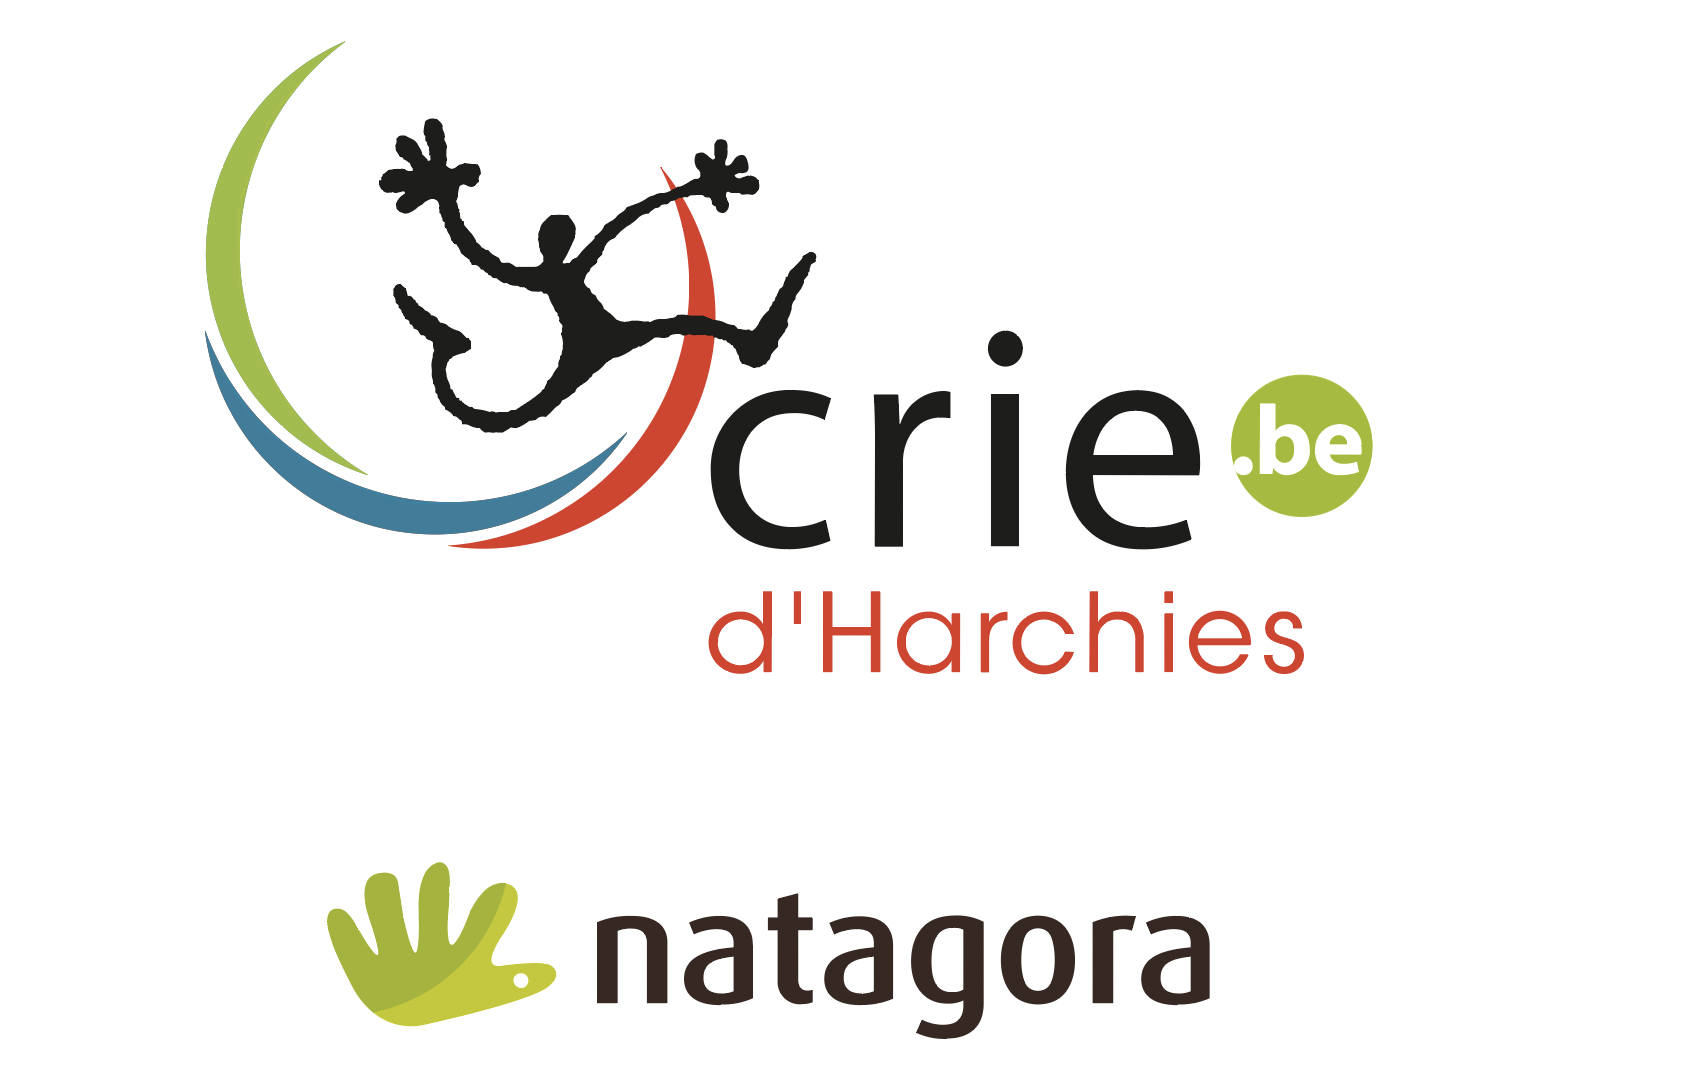 image CRIE_HARCHIES3.png (0.5MB)
Lien vers: https://crieharchies.natagora.be